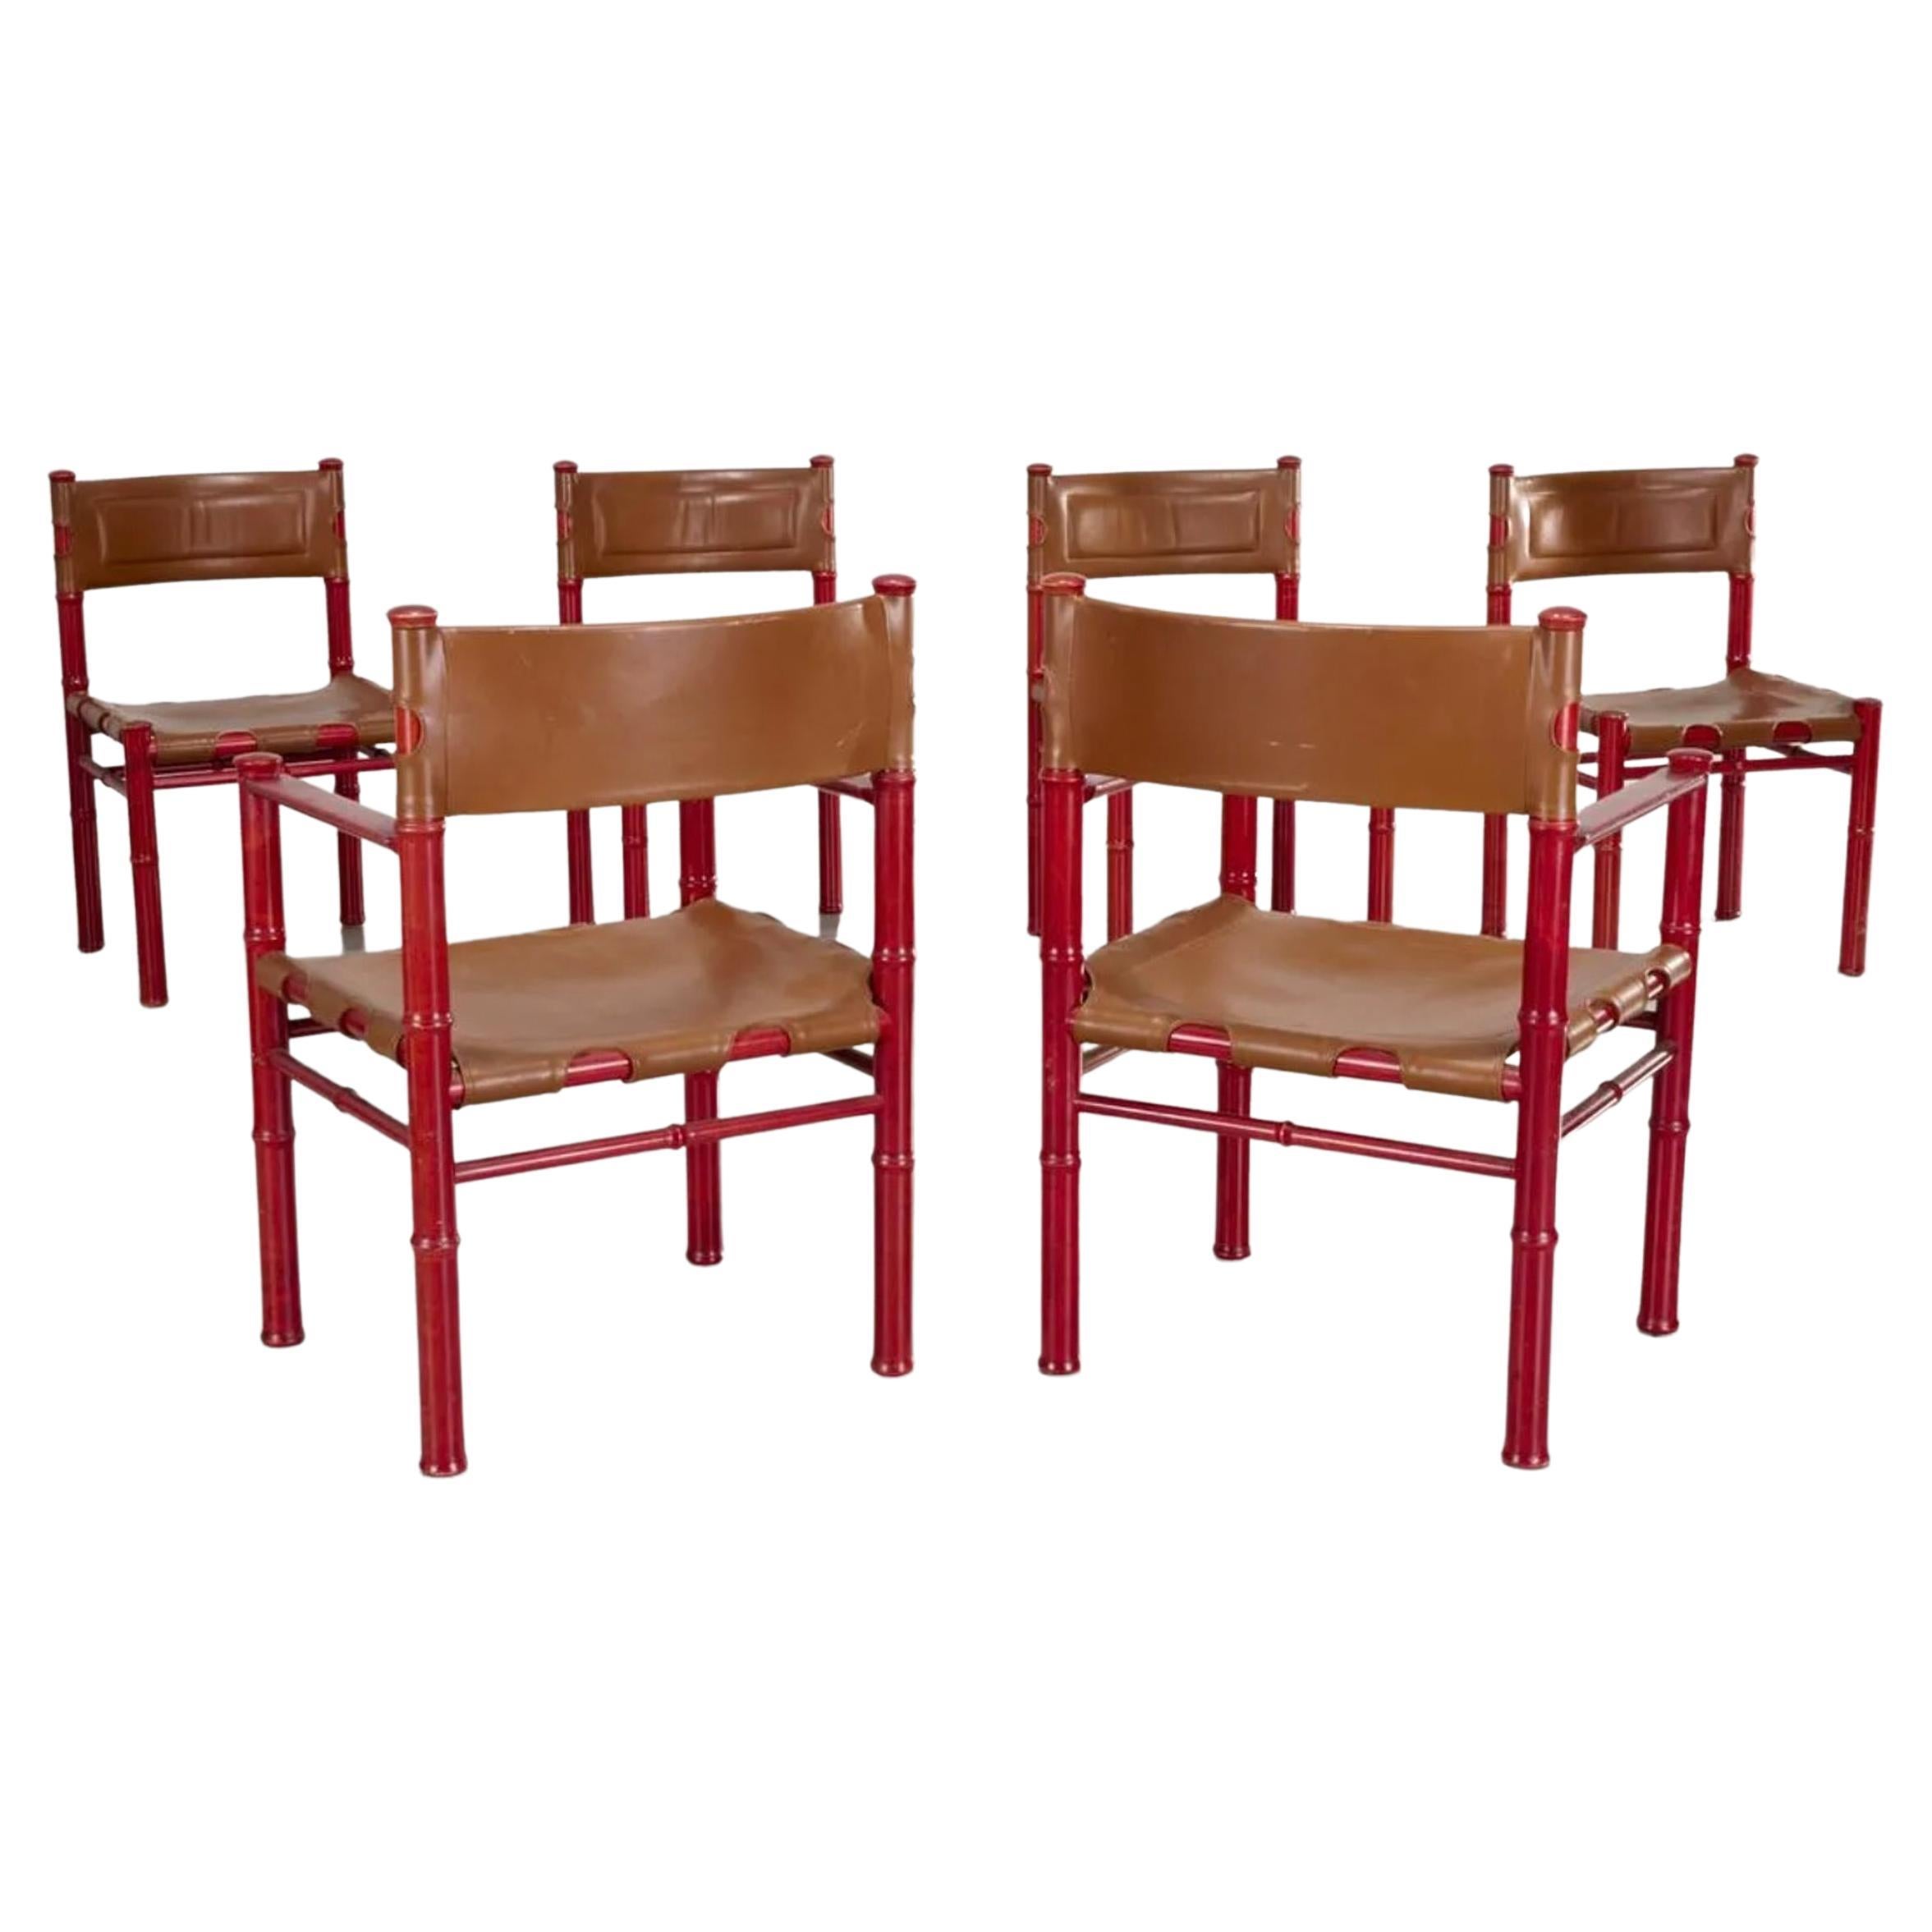 Finnish 6 Midcentury Scandinavian Modern Red Brown Leather Dining Chairs Asko Finland For Sale